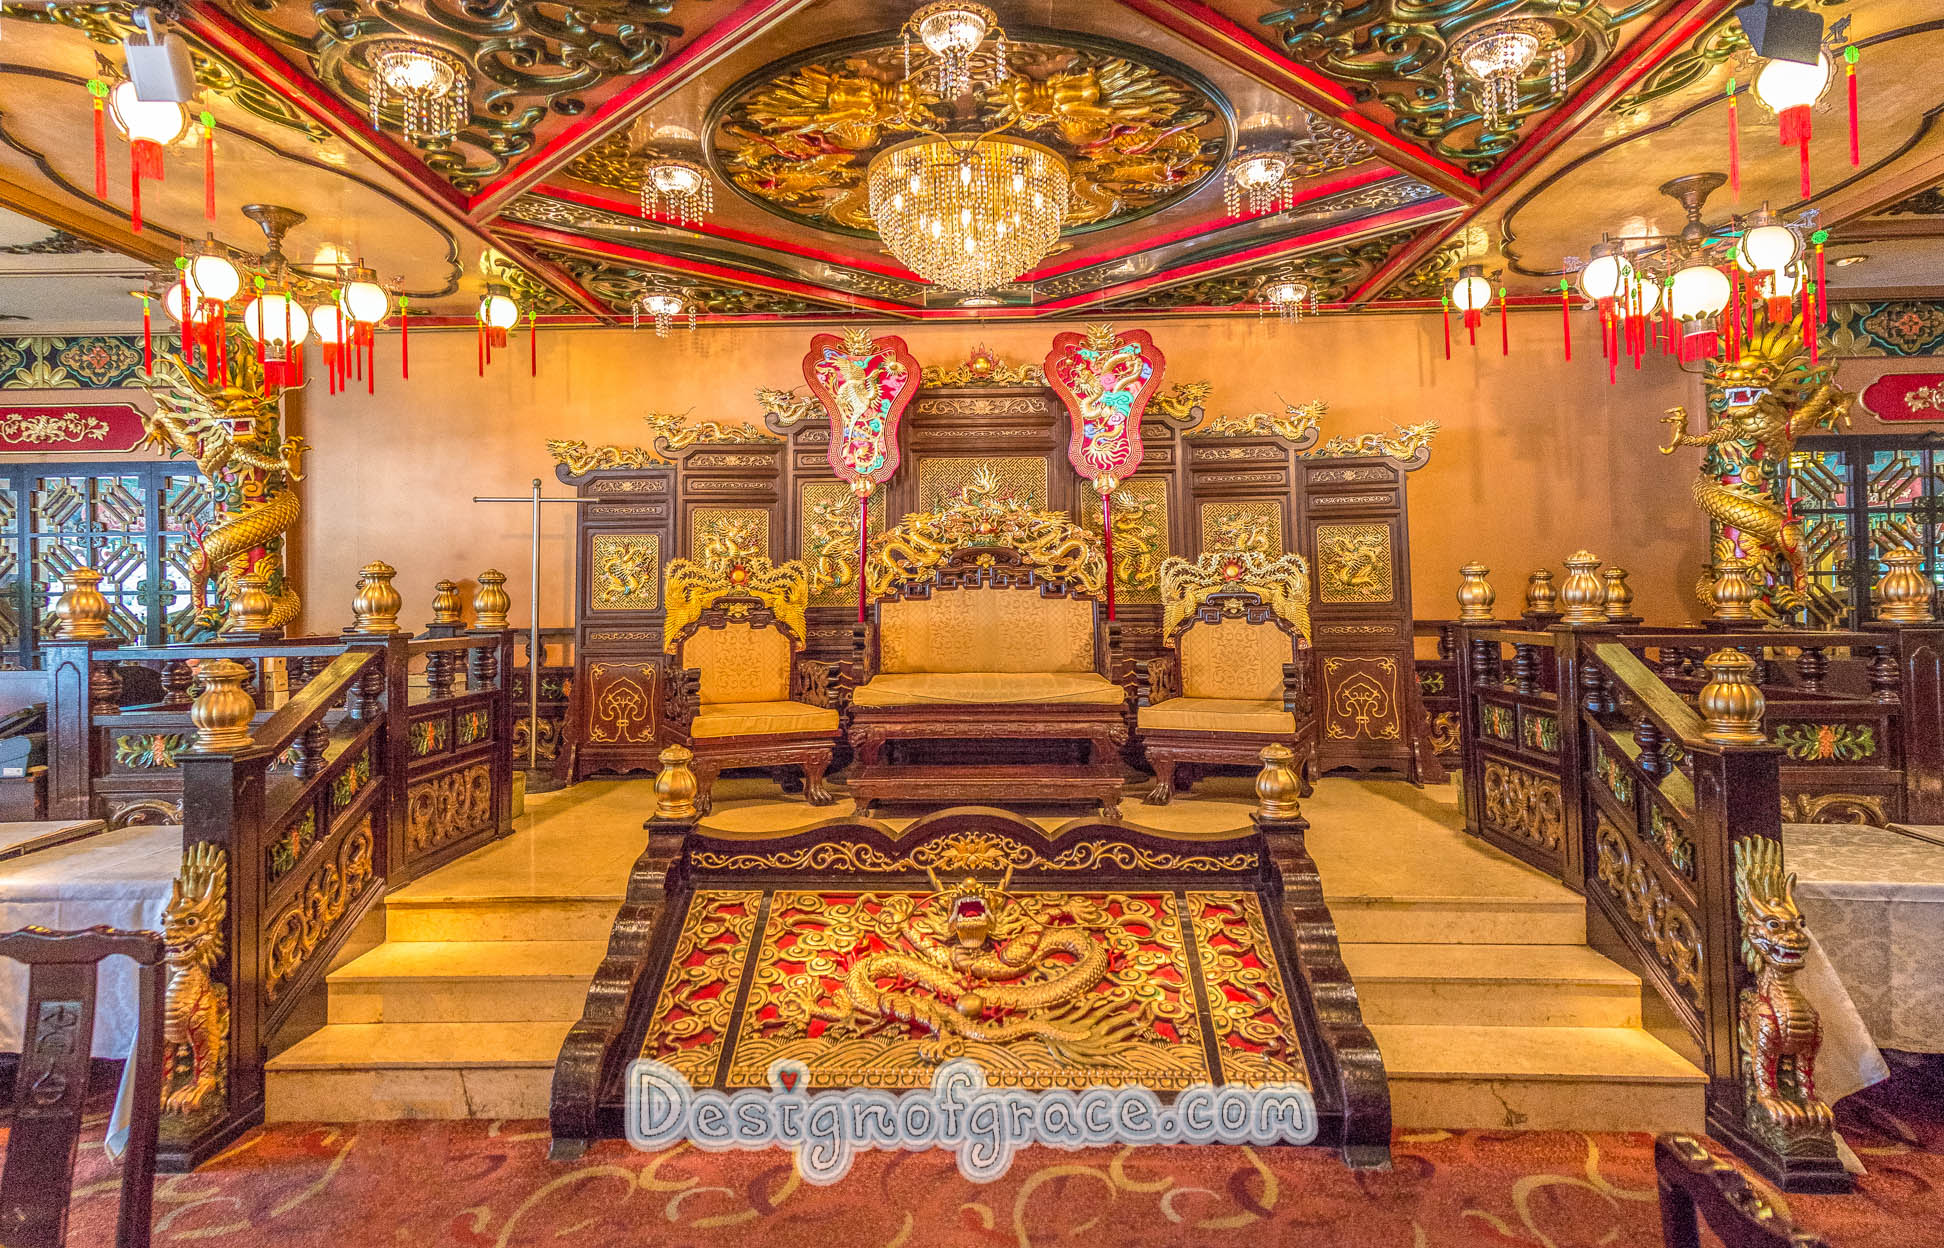 A Very elaborate gold and red throne benches at Jumbo Kingdom in Hong Kong